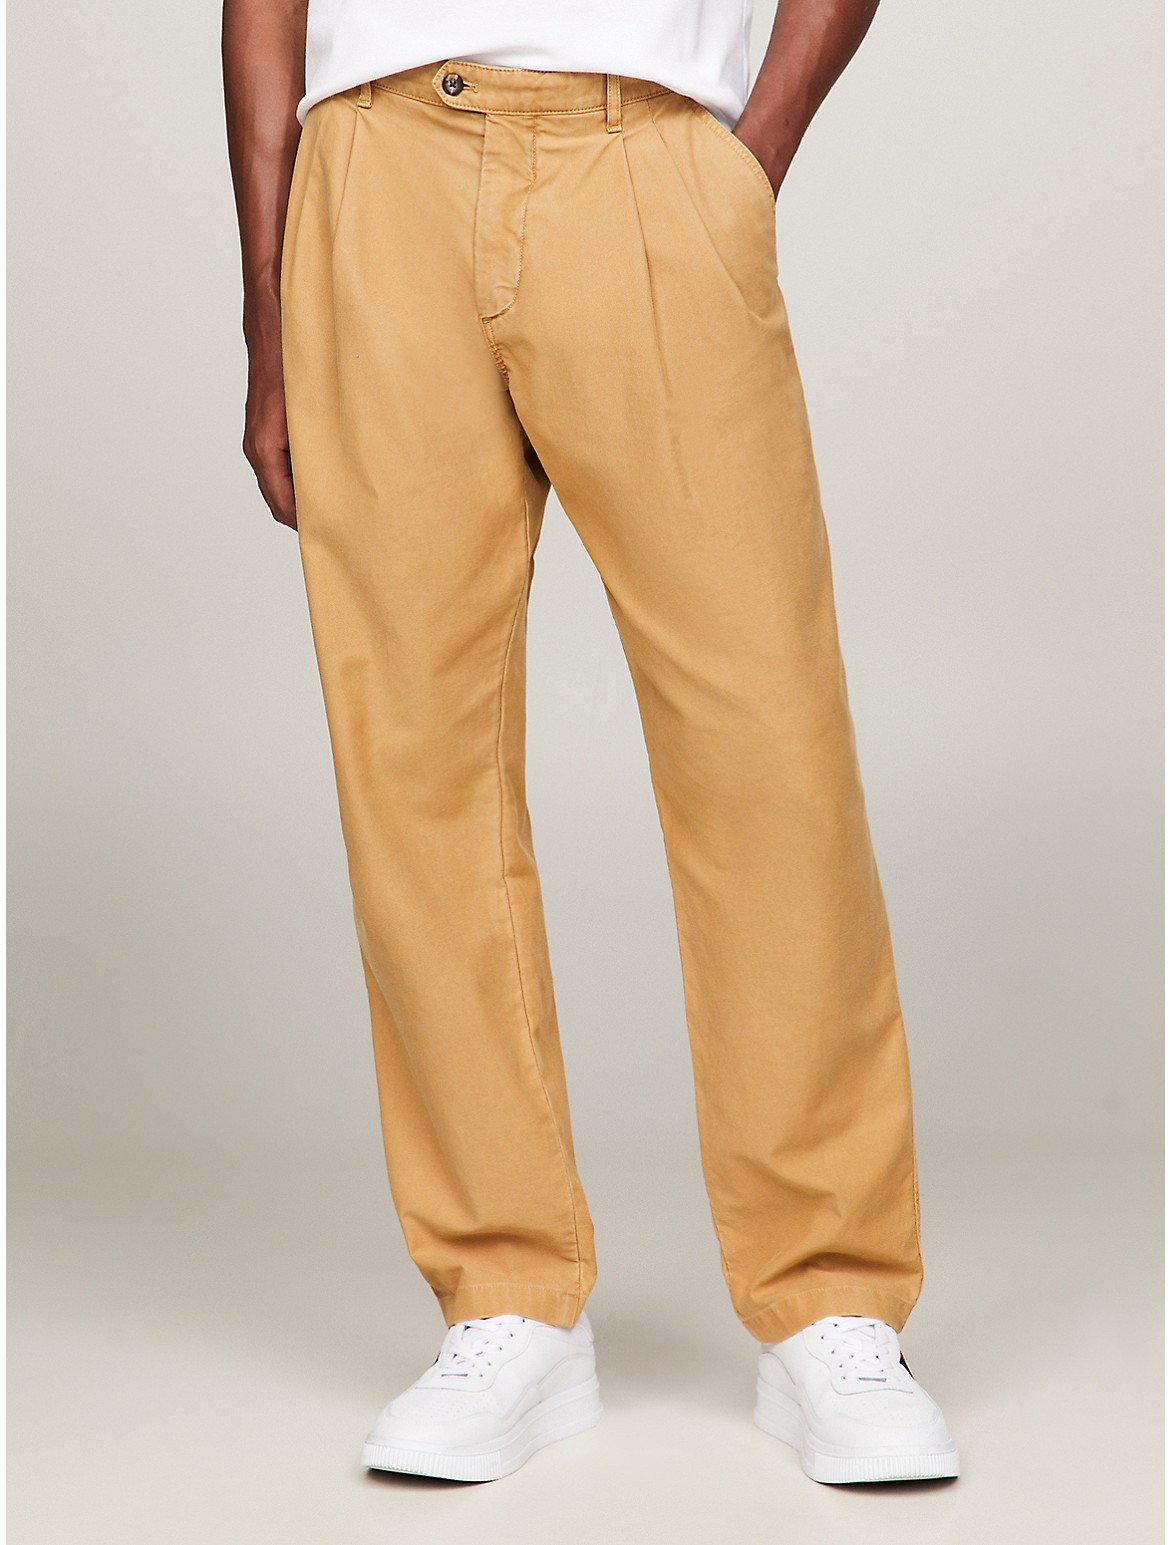 Tommy Hilfiger Men's Tapered Fit Garment-Dyed Chino